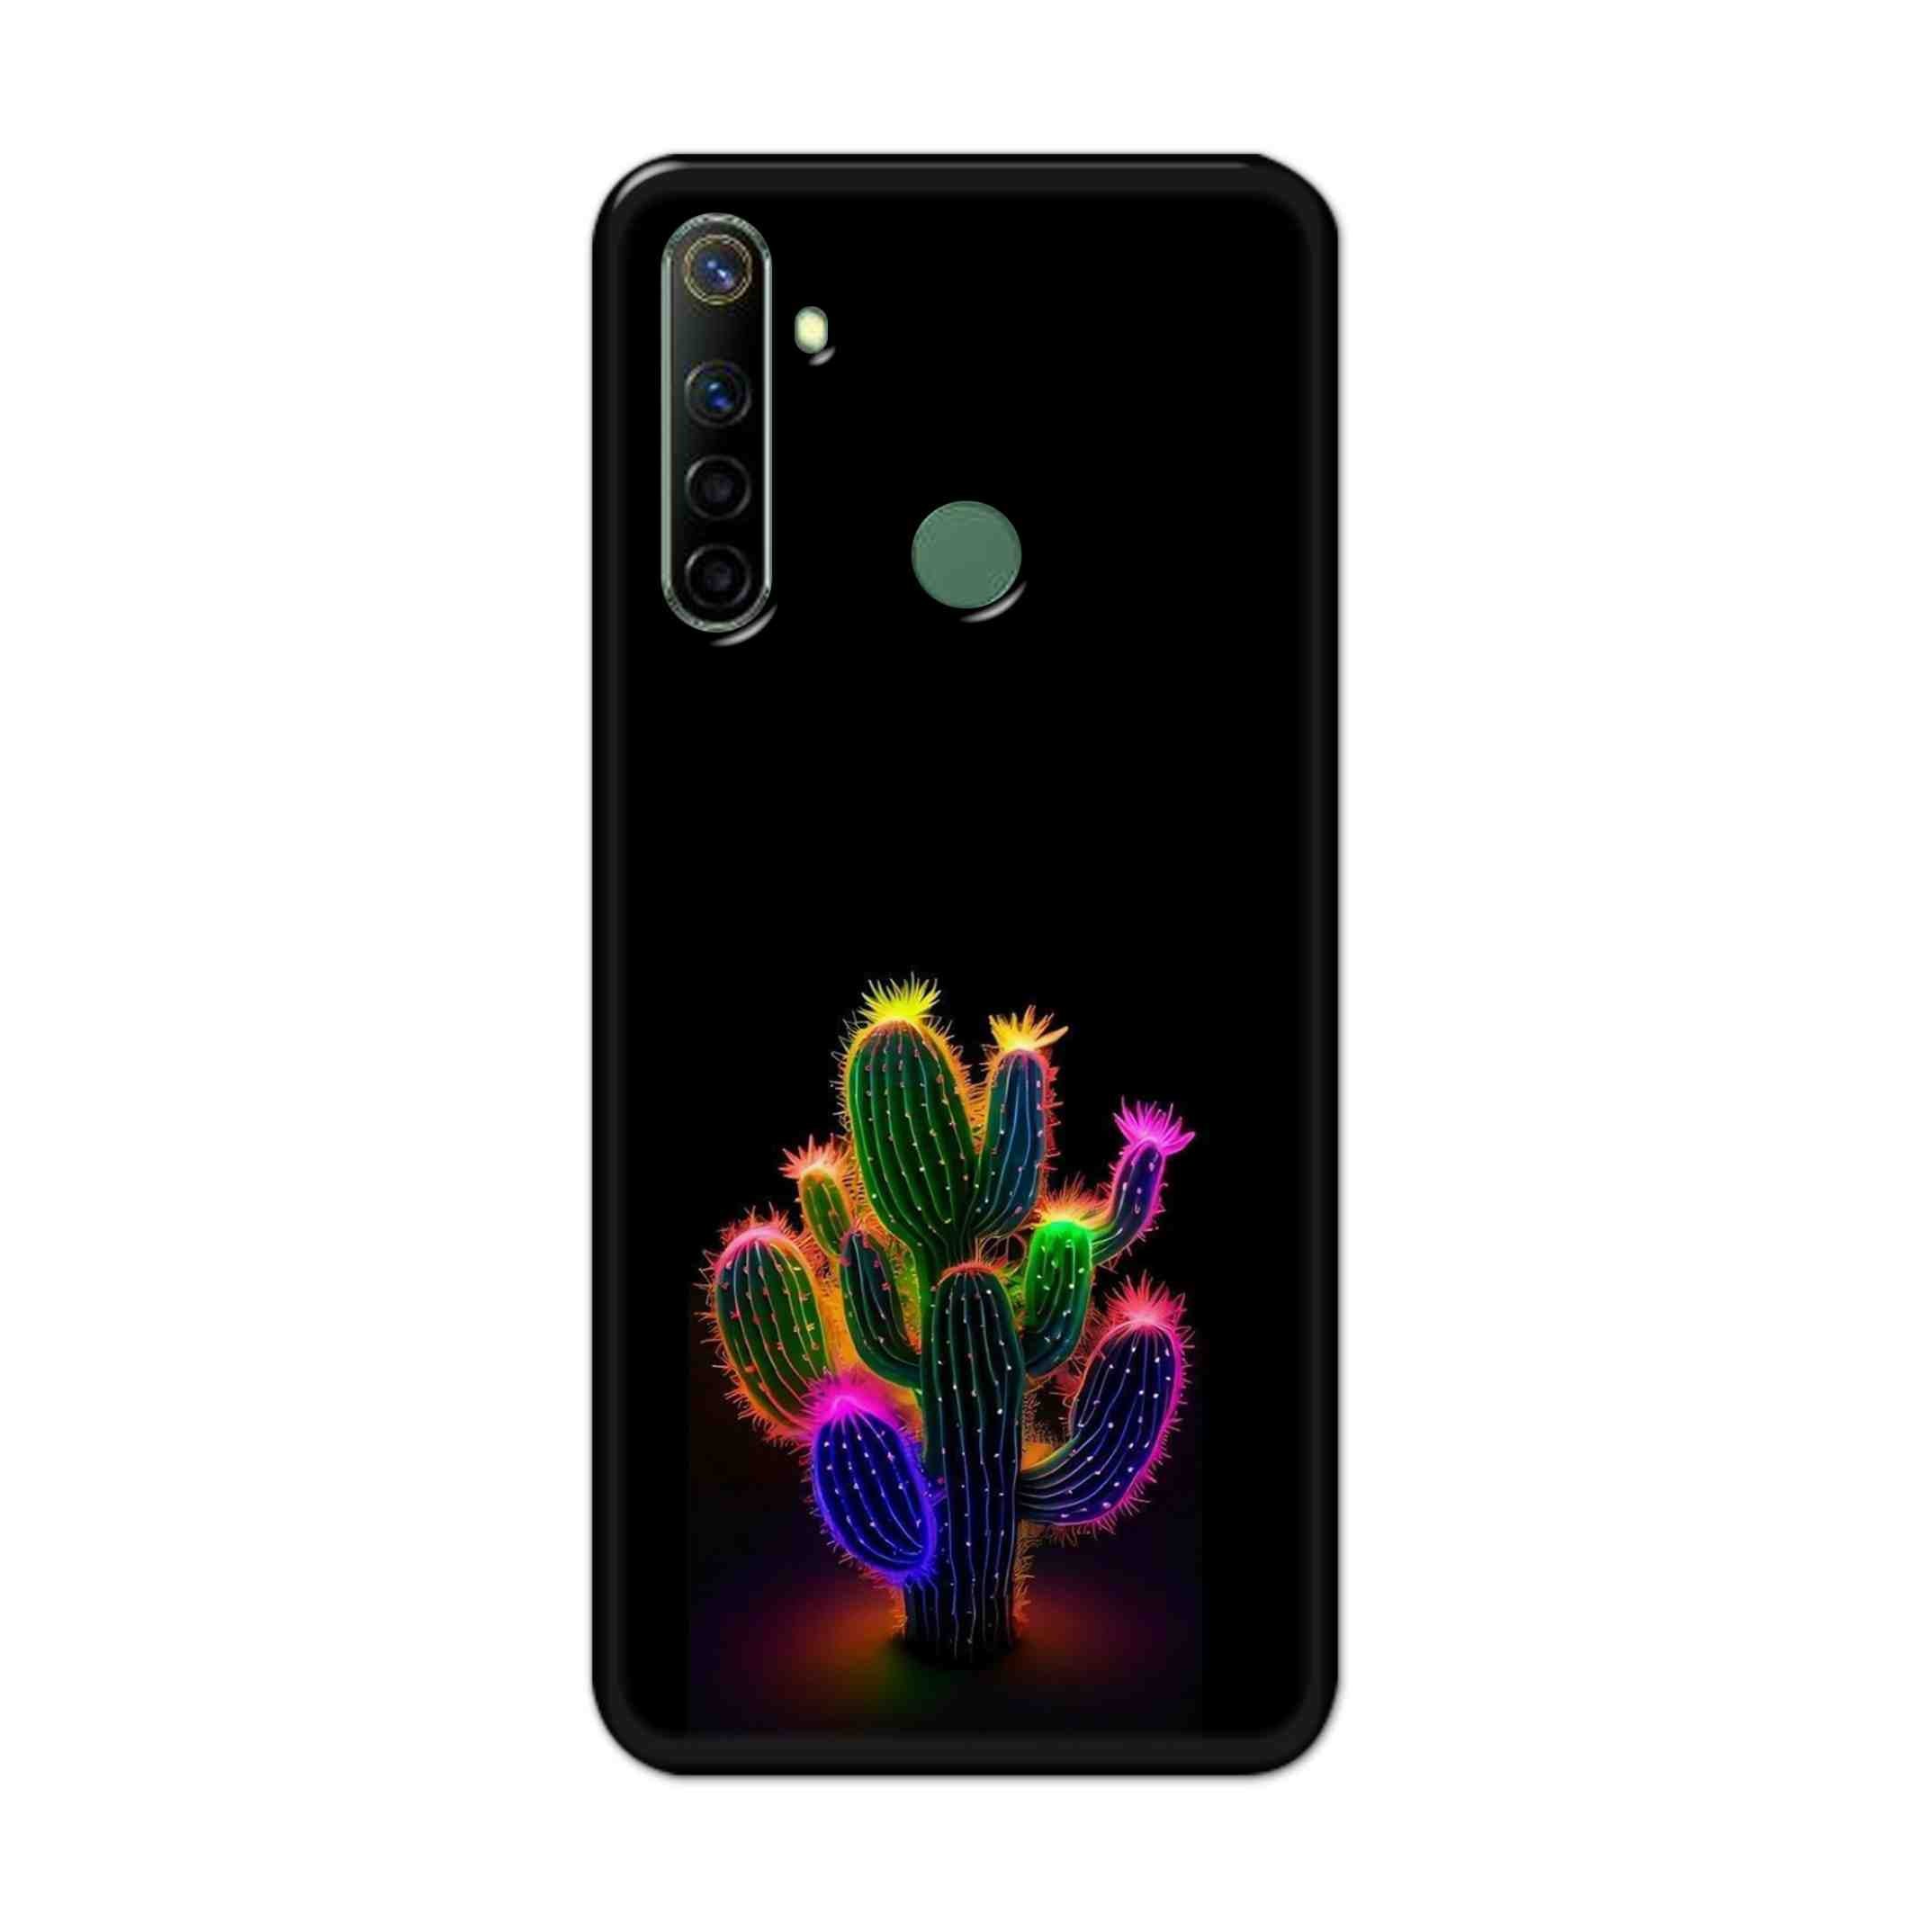 Buy Neon Flower Hard Back Mobile Phone Case Cover For Realme Narzo 10a Online